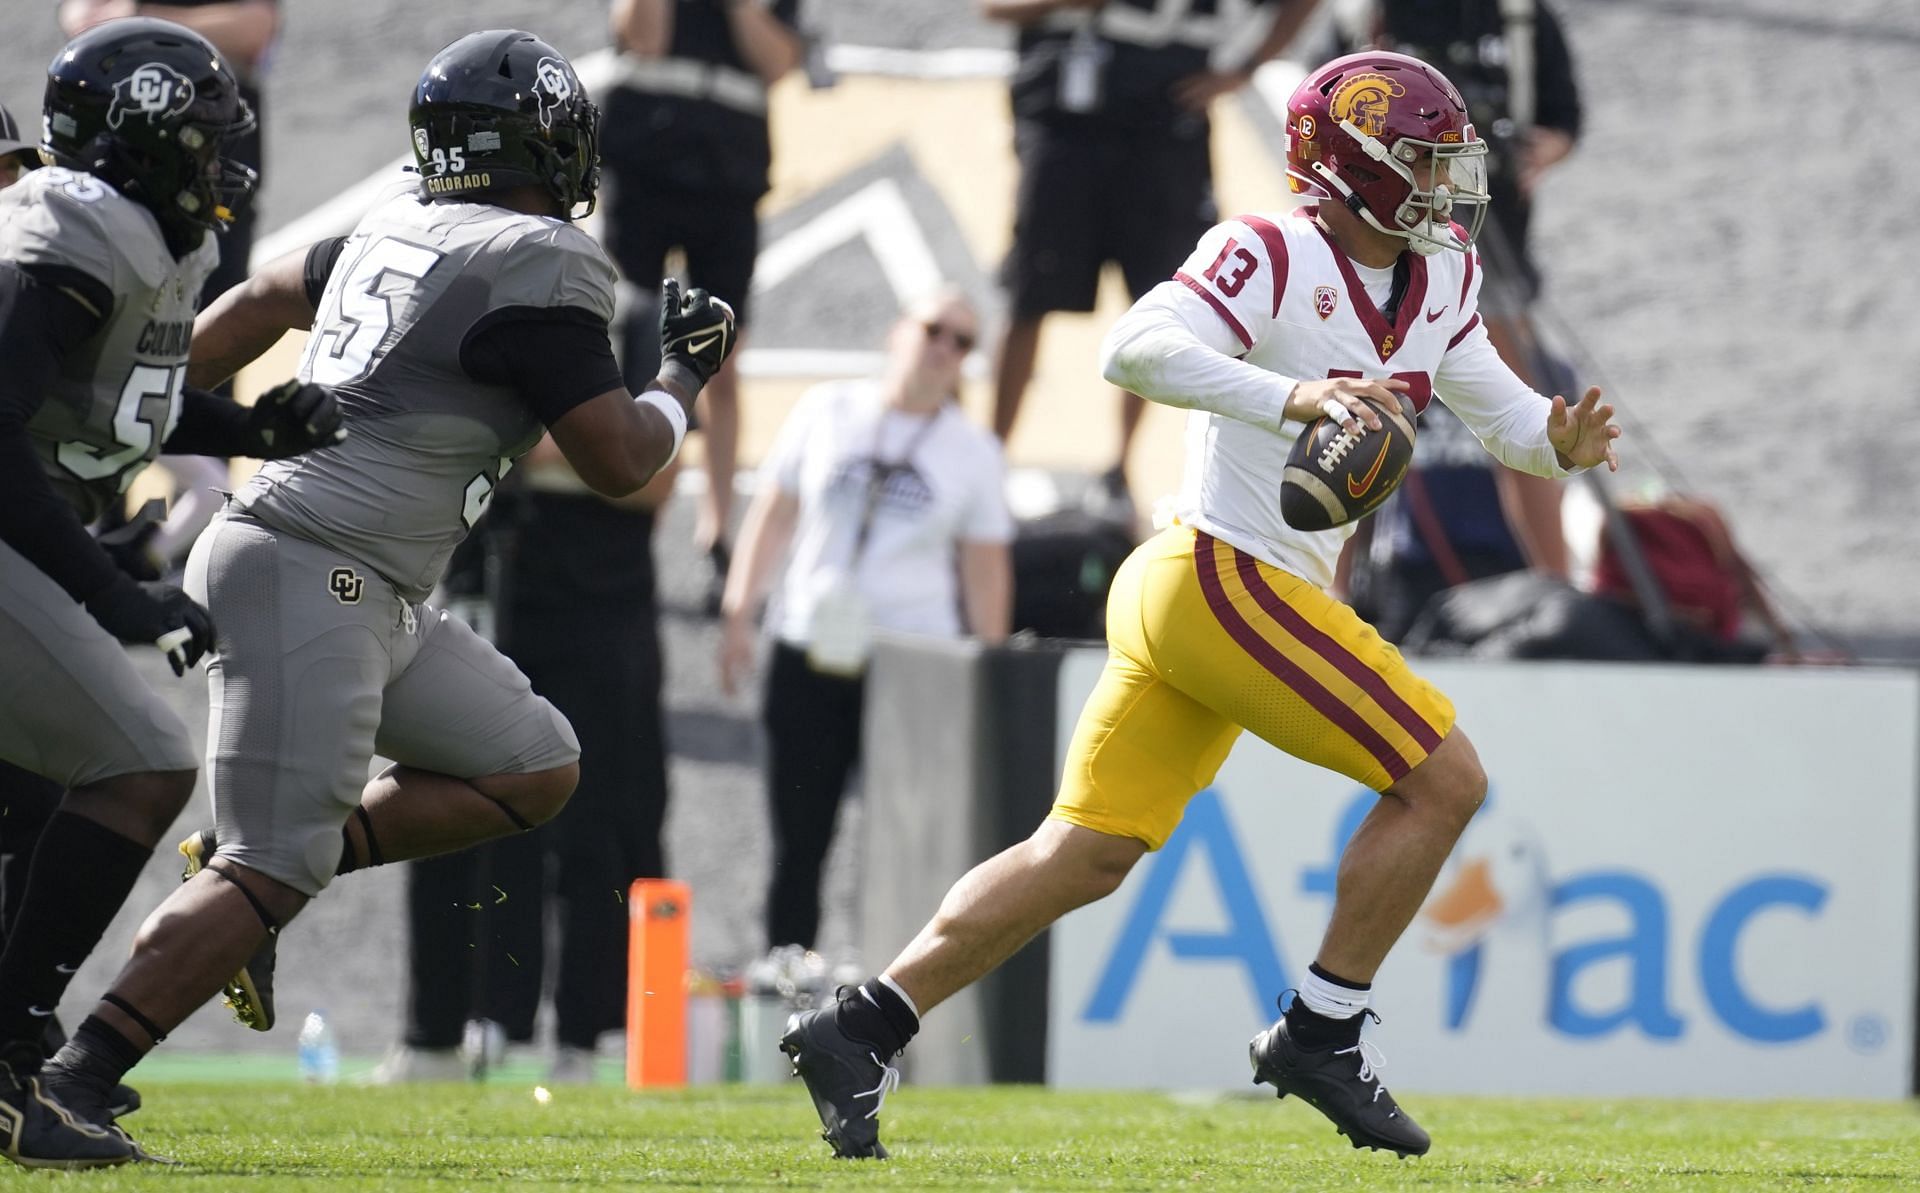 USC Colorado Football: Southern California quarterback Caleb Williams, right, looks to pass the ball as Colorado defensive lineman Bishop Thomas pursues in the first half of an NCAA college football game, Saturday, Sept. 30, 2023, in Boulder, Colo. (AP Photo/David Zalubowski)